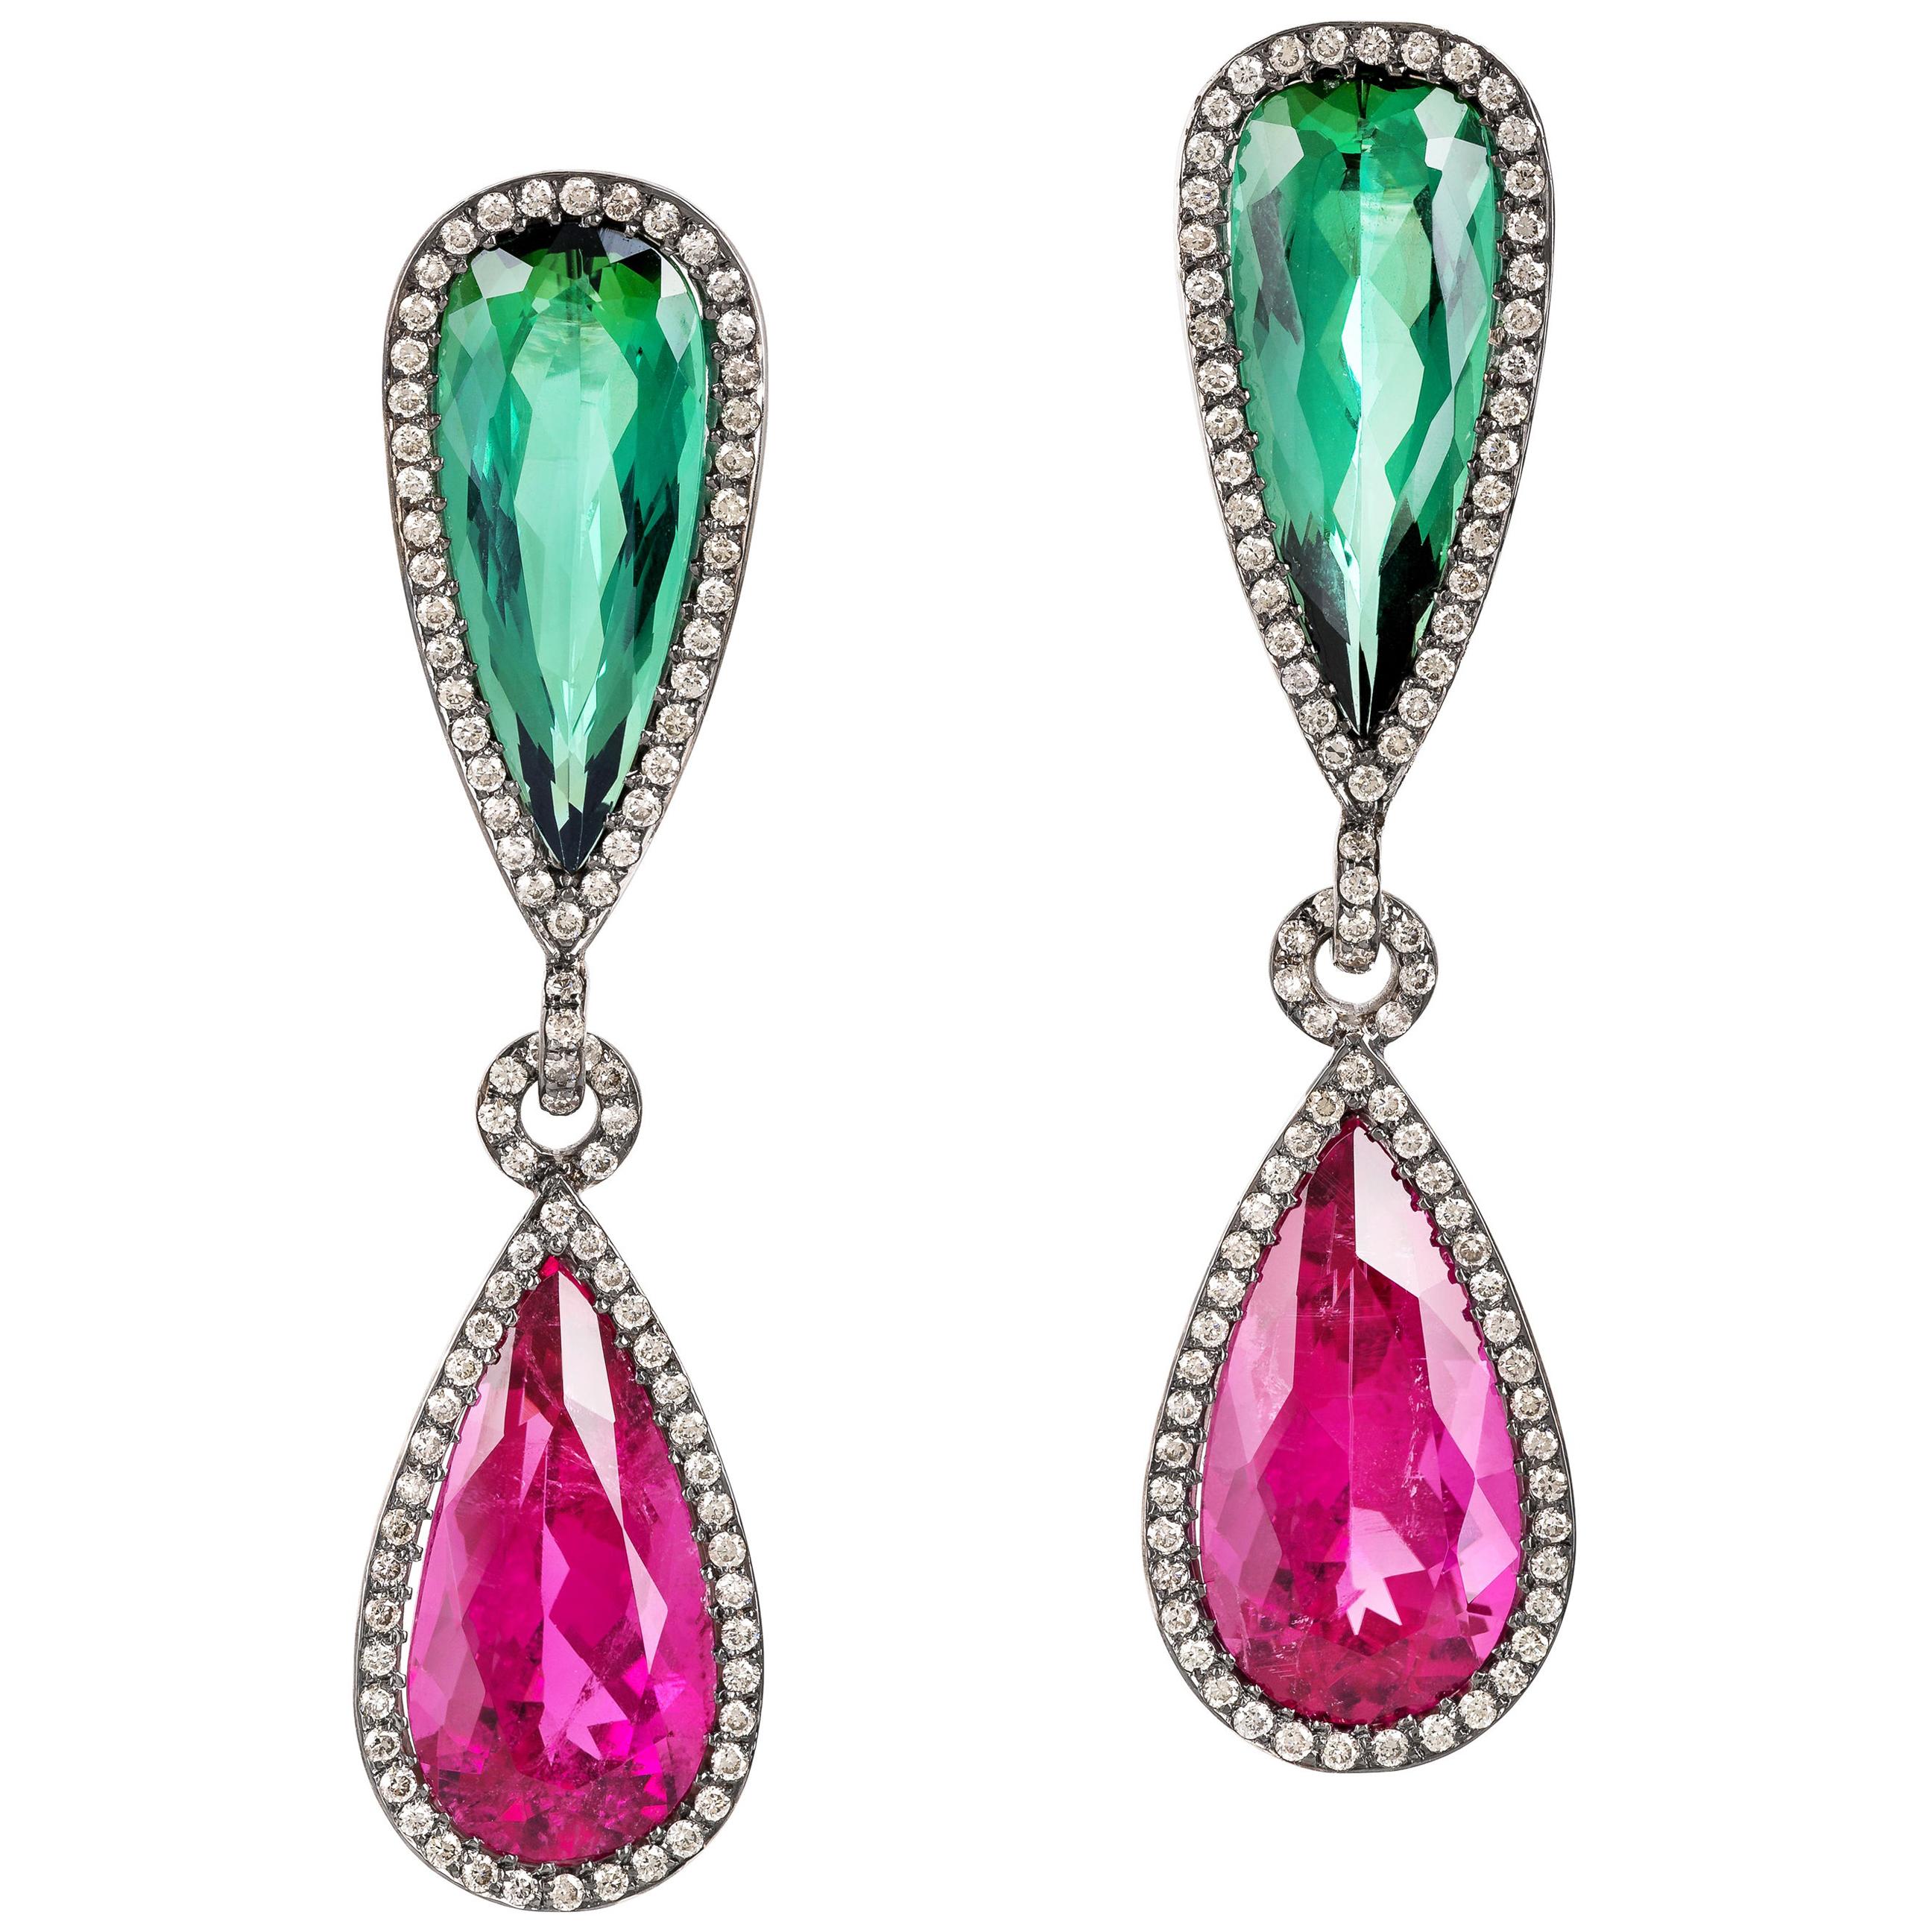 Rosior one-off Tourmaline and Diamond Dangle Earrings set in White Gold